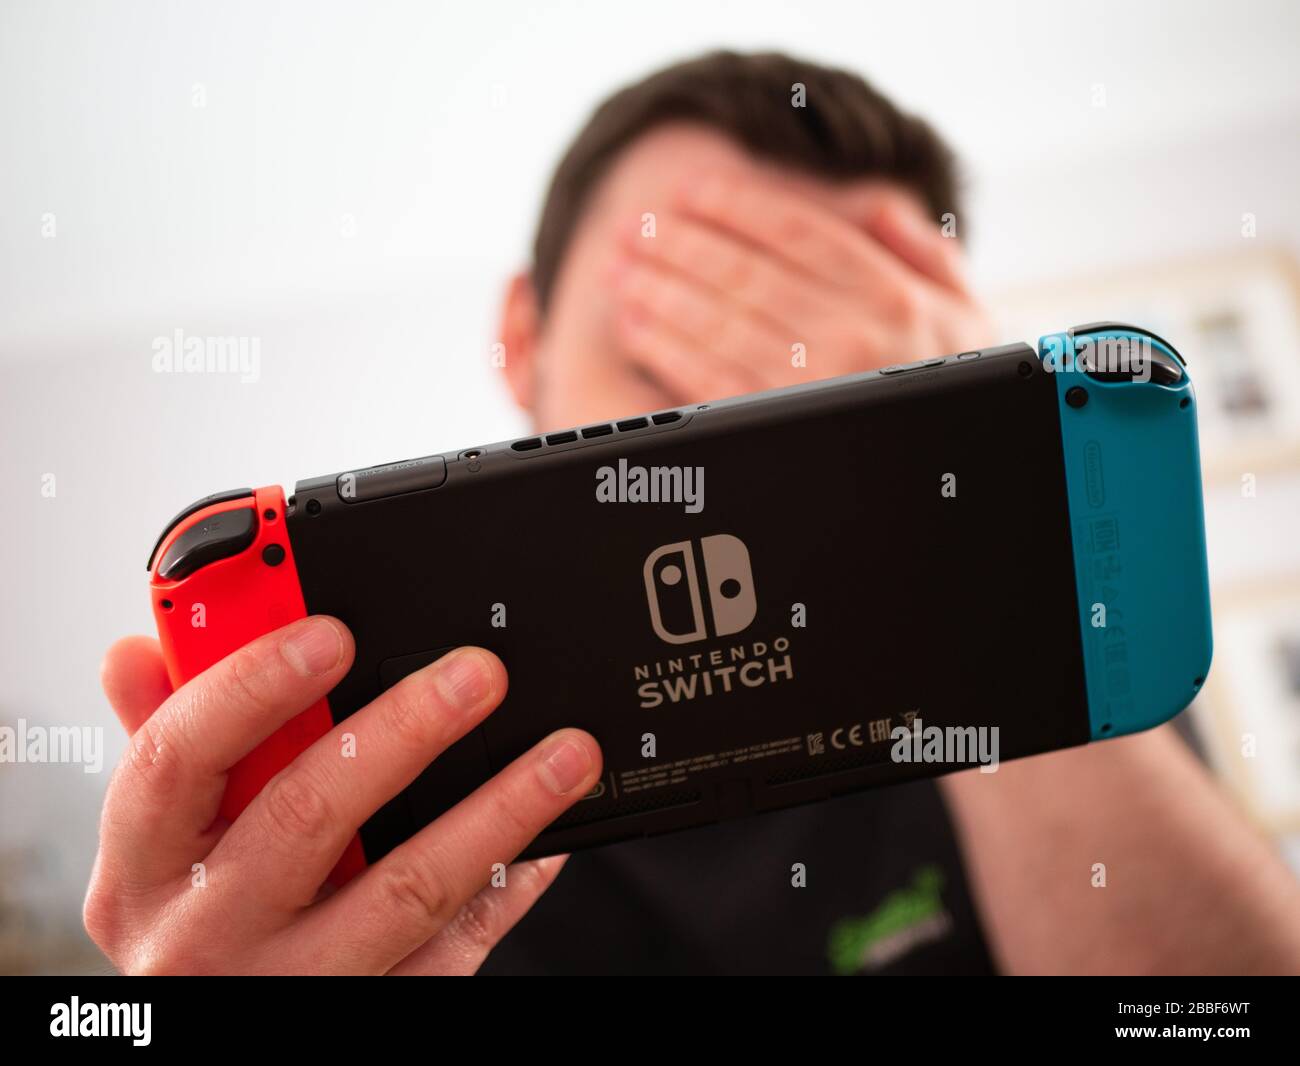 UK, March 2020: Nintendo Switch games console player losing disappointed with head in hands Stock Photo